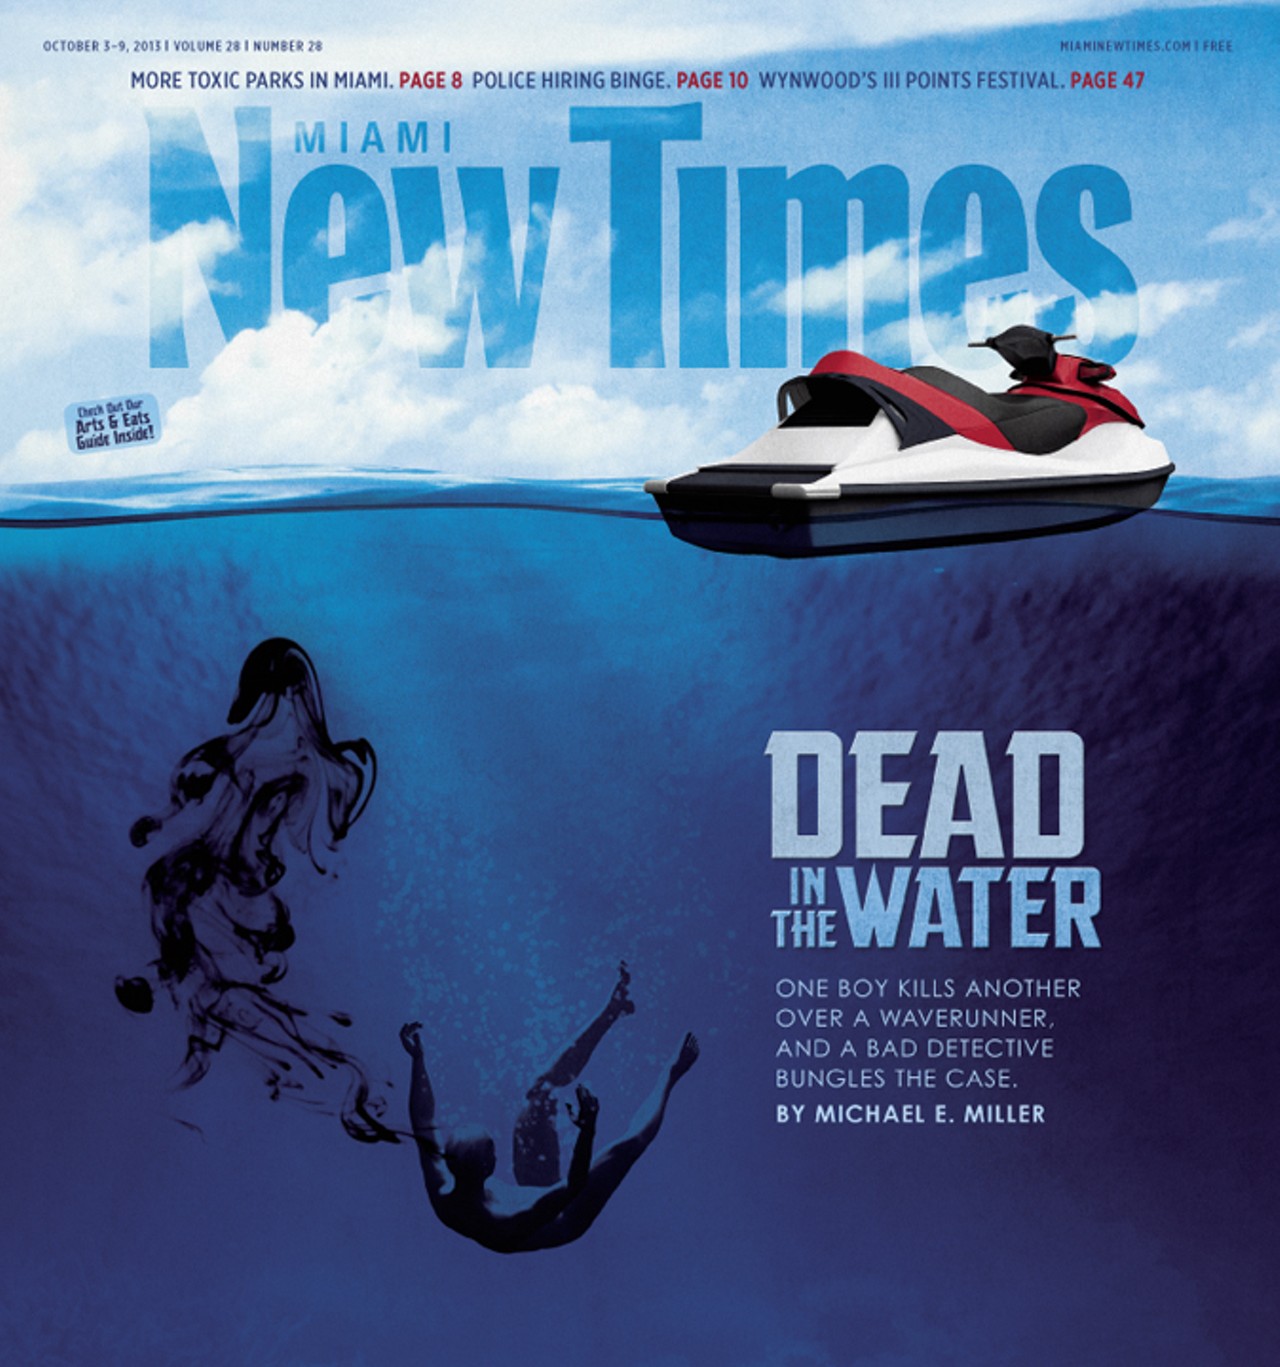 "Dead the in the Water," by Michael E. Miller in the Miami New Times.